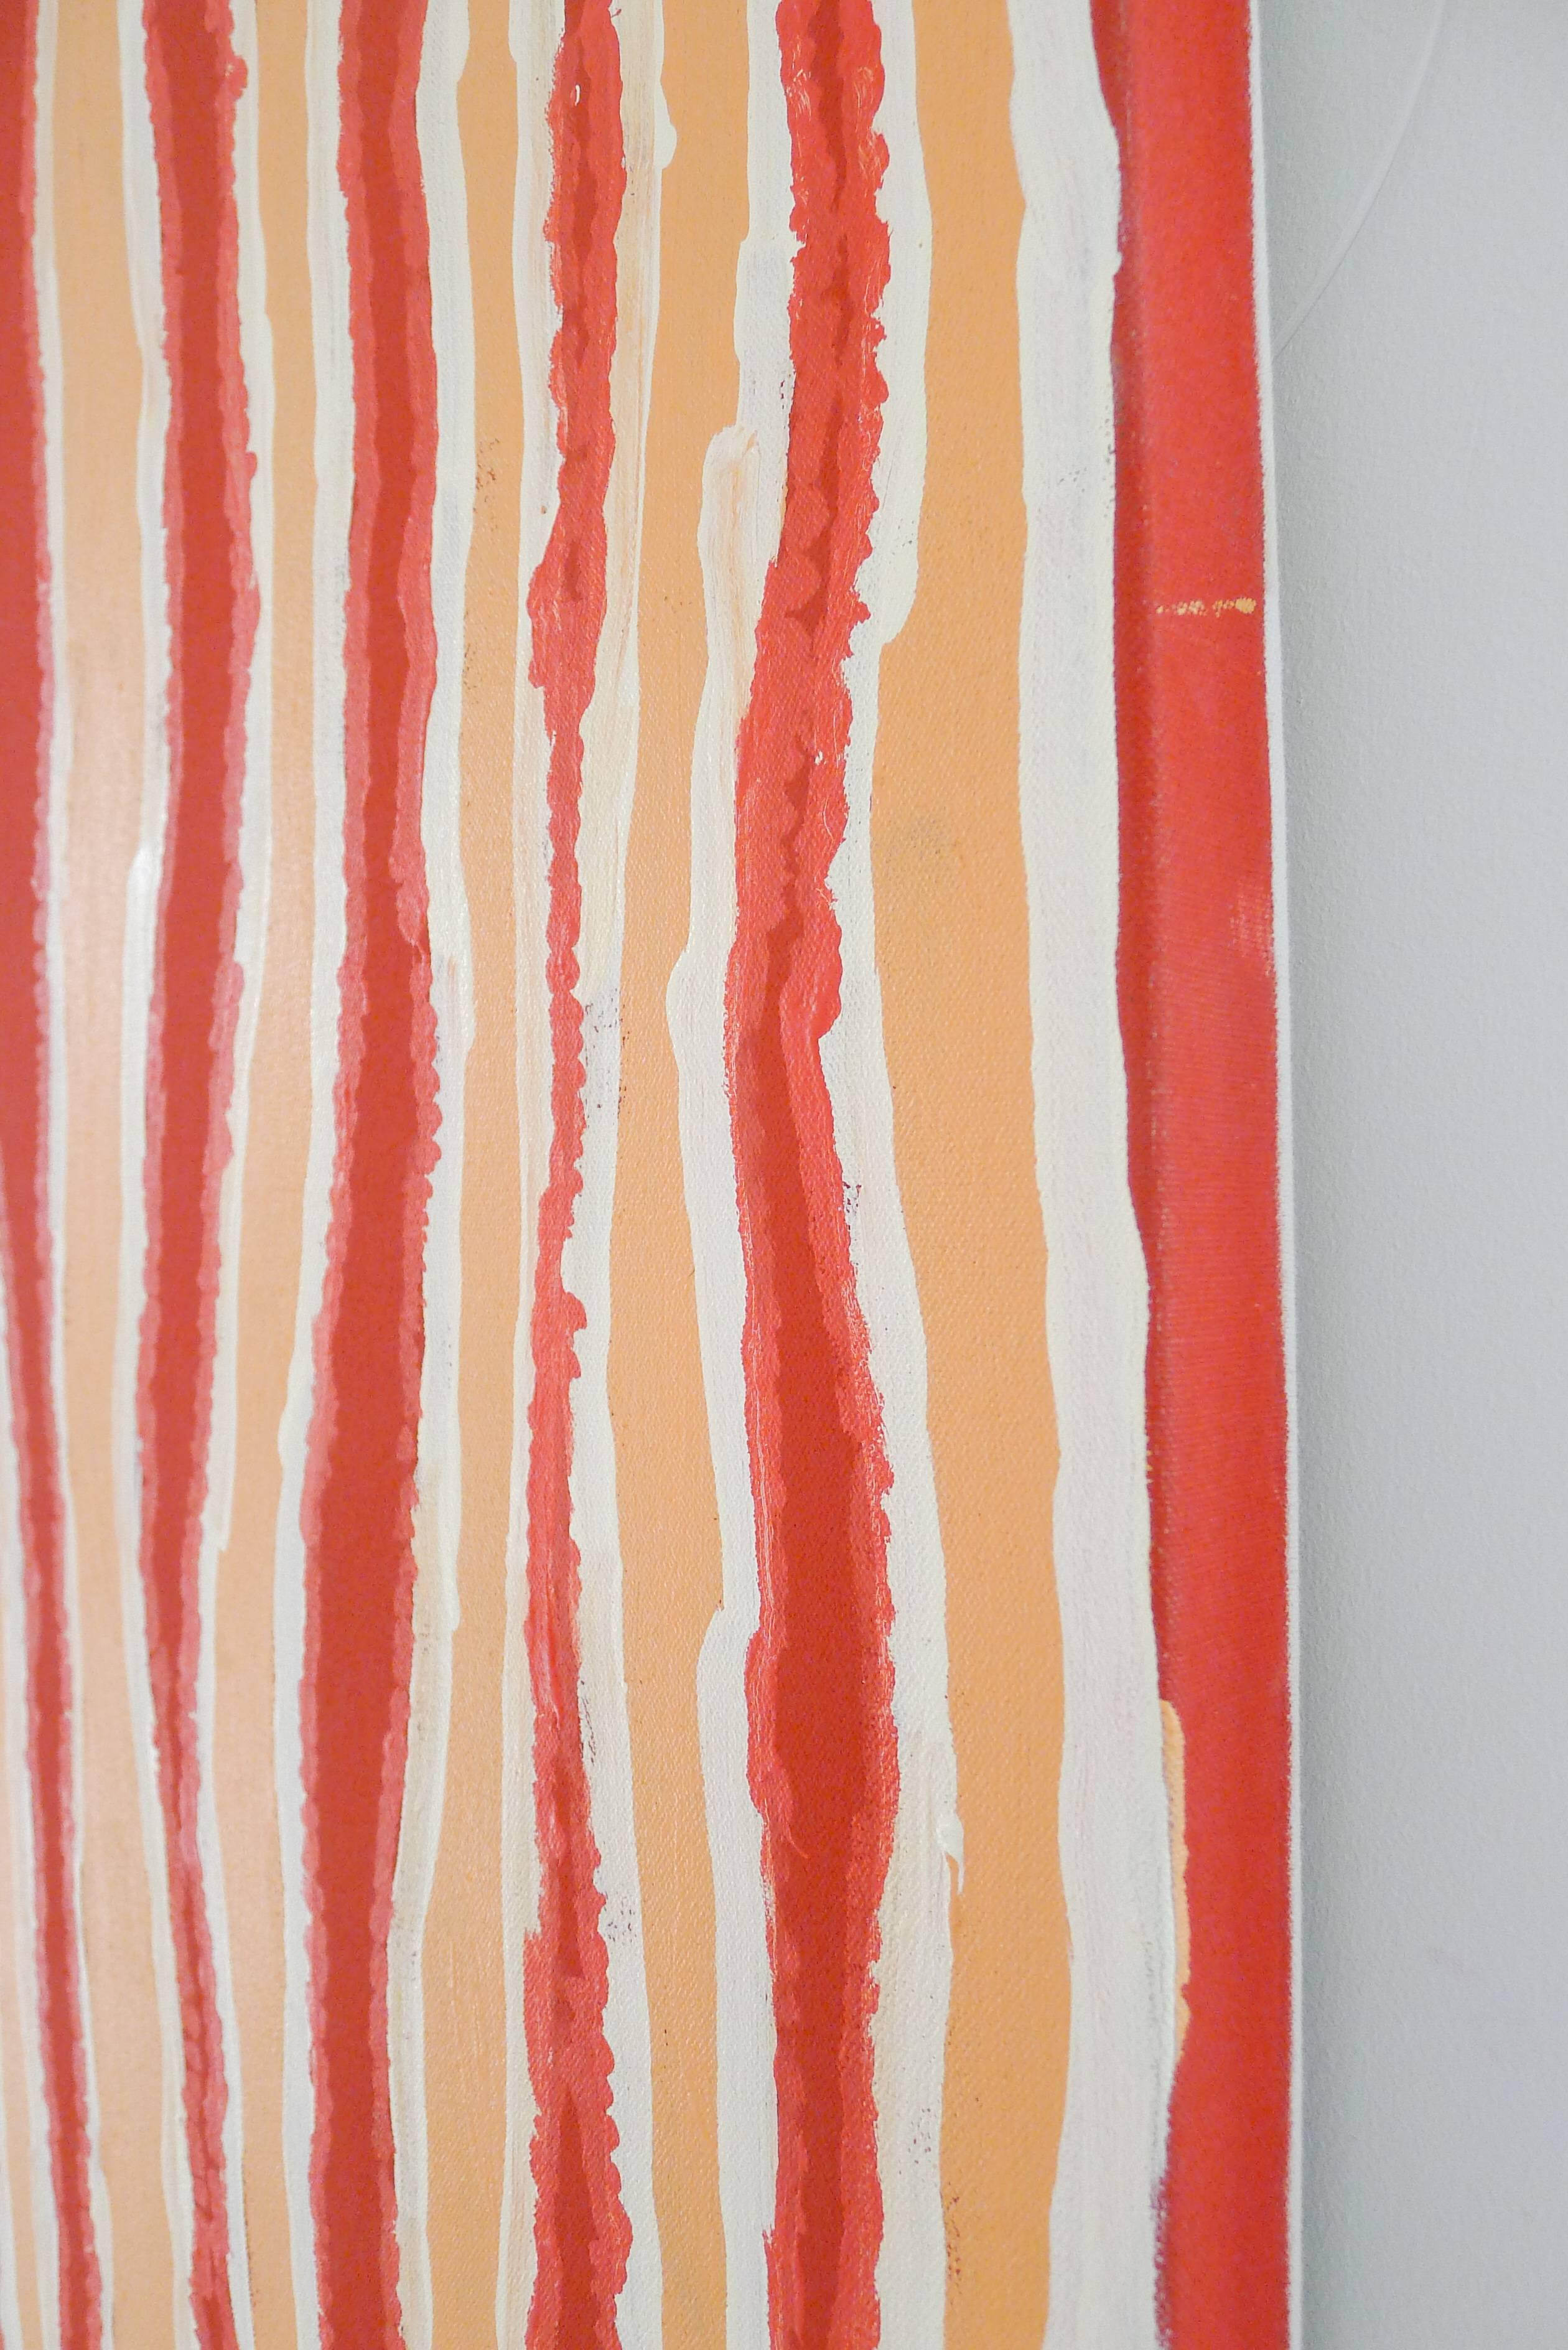 Painted Warm Red and Orange Striped Australian Aboriginal Painting